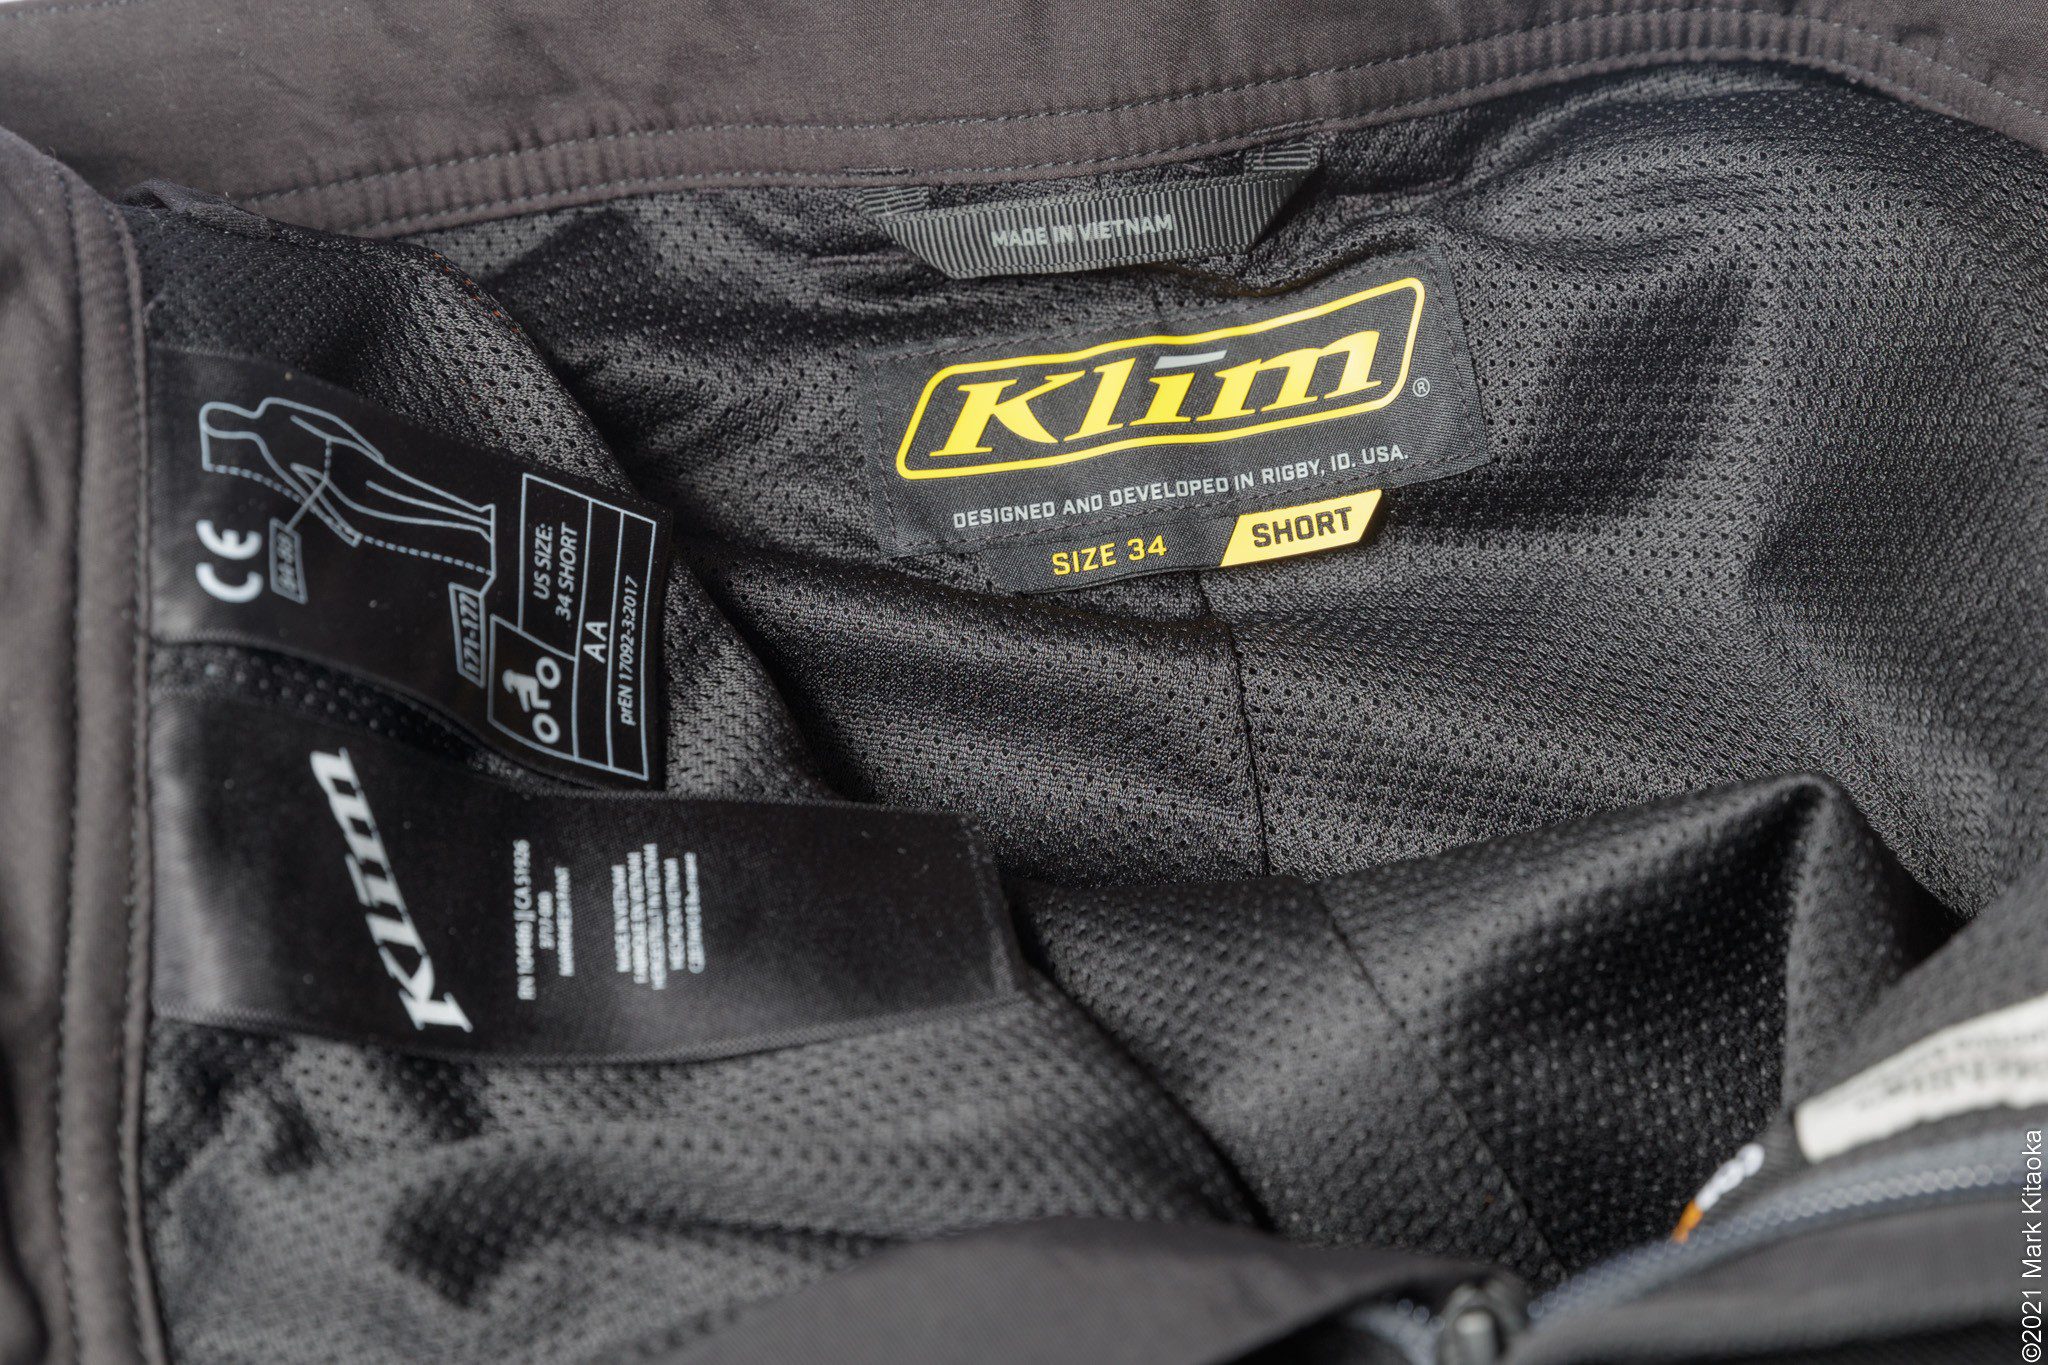 Interior tag of the Klim pants showing size and cut